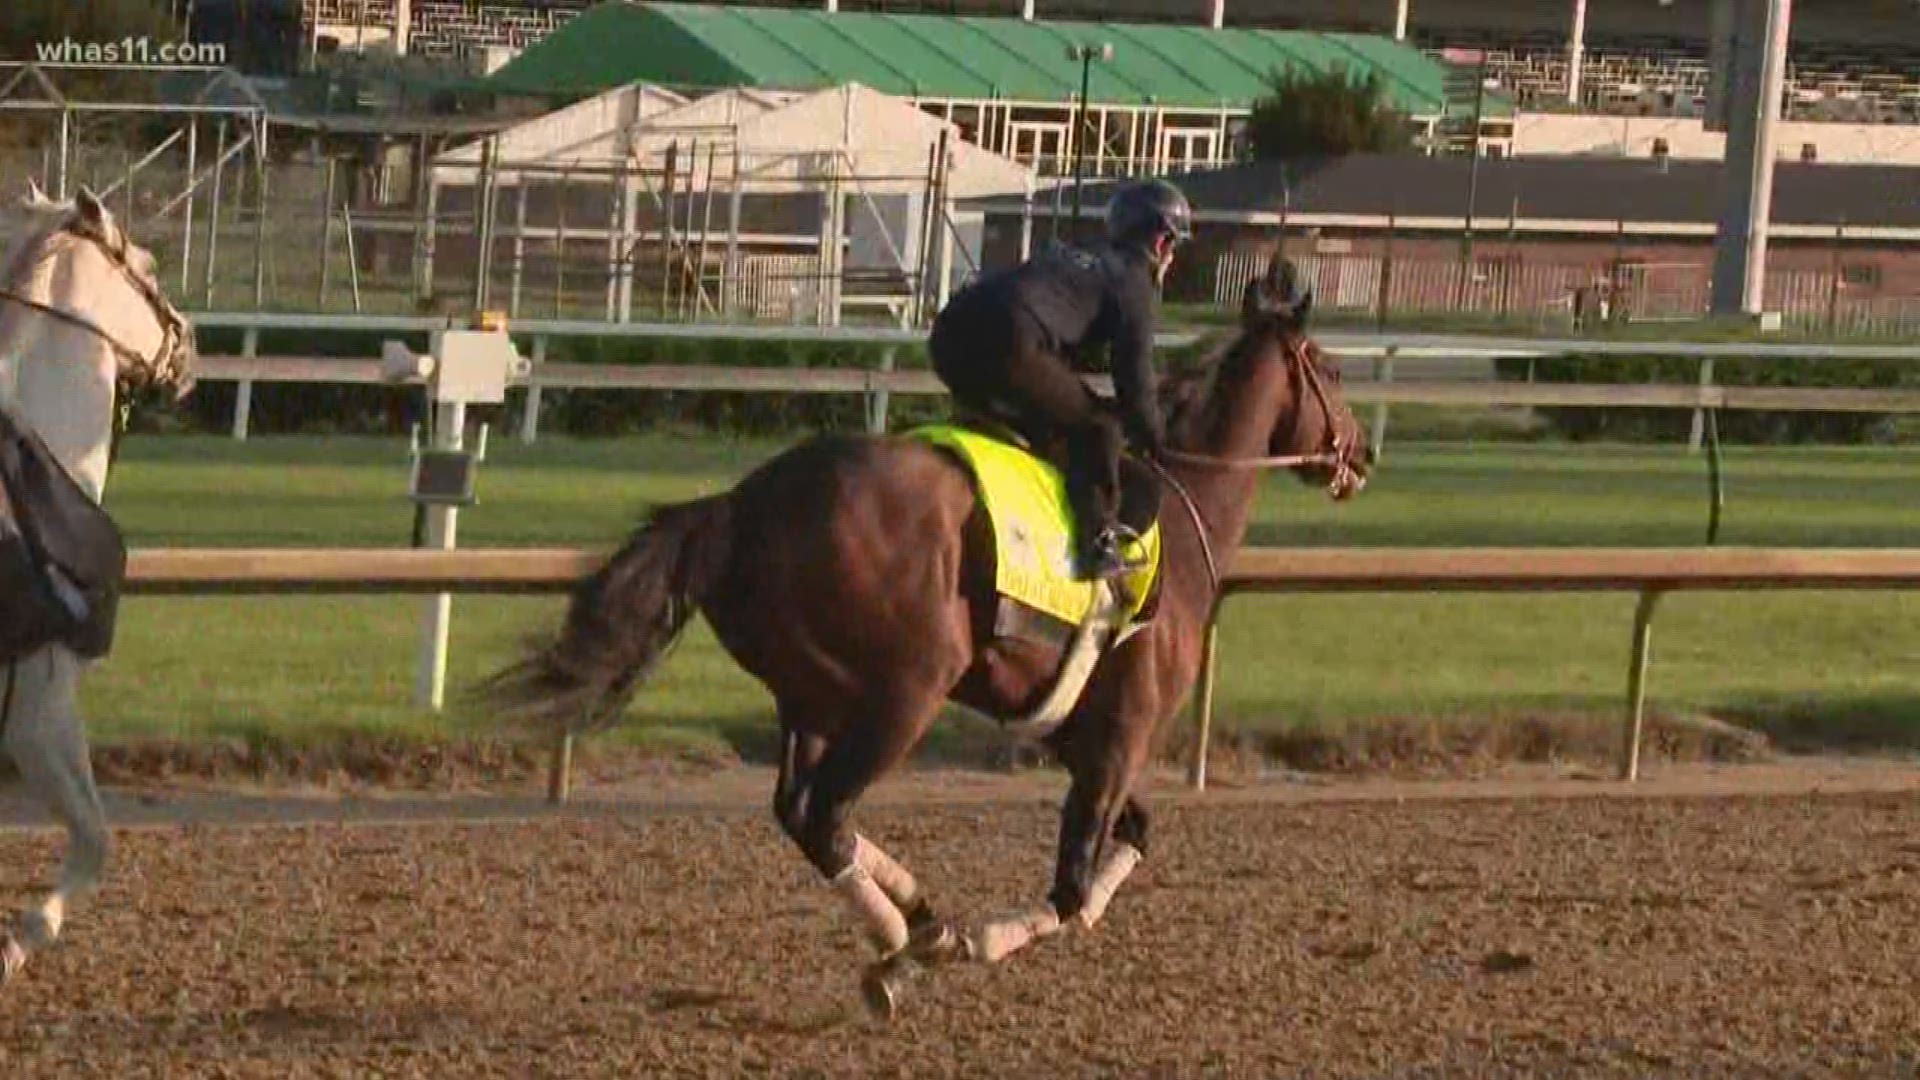 At Barn 28, it was a perfect morning and a perfect final work for expected Derby favorite Omaha Beach. Trainer Richard Mandella was quietly confident after his colt worked 5 furlongs in a stunning 59 seconds flat.